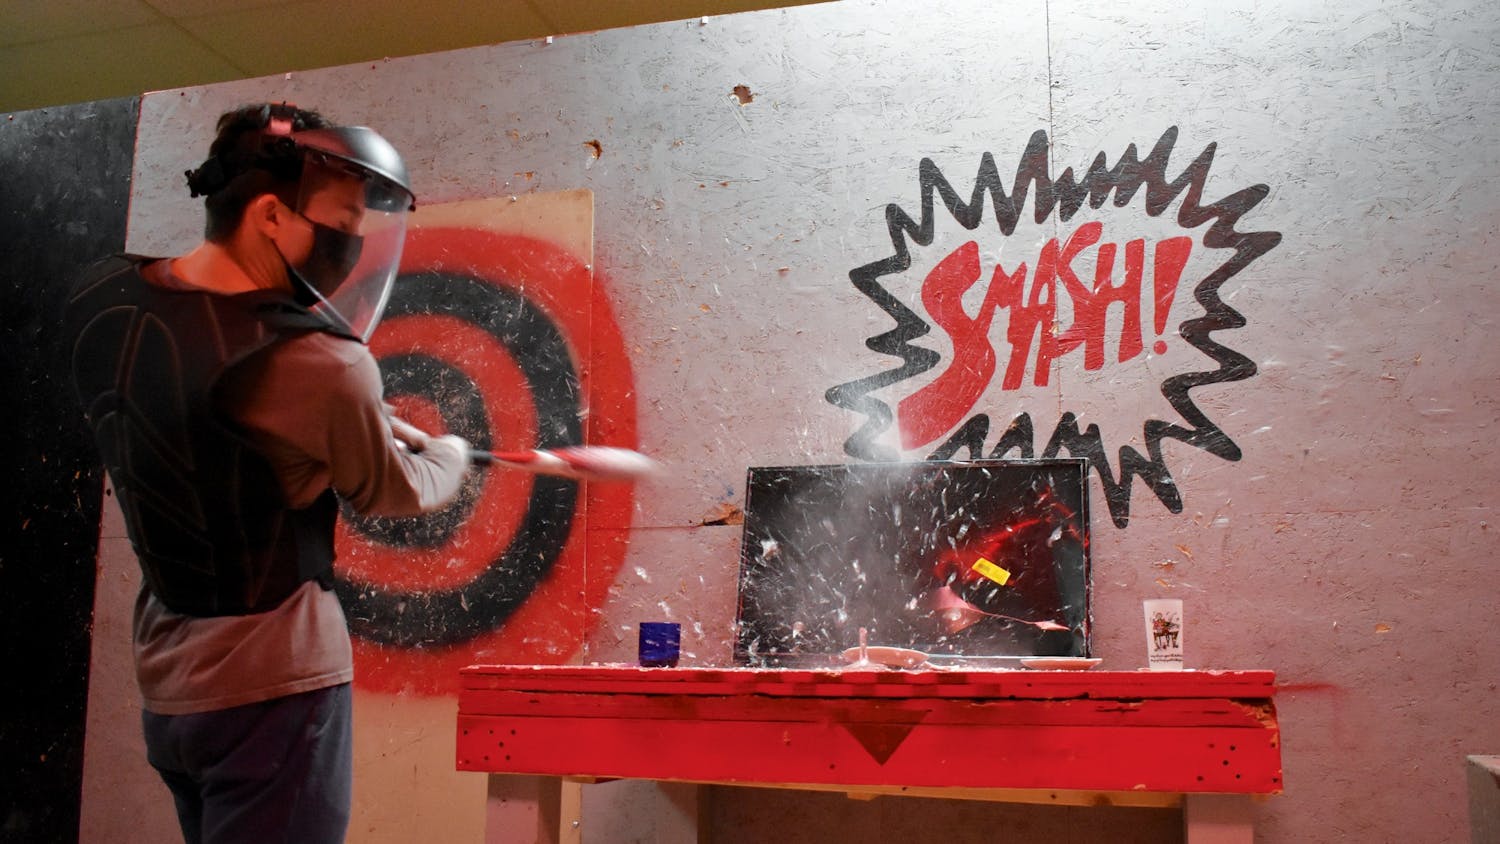 The Smash Room in West Columbia is the perfect place to relieve stress. Visitors are allowed to smash items such as mugs, glasses and even televisions.